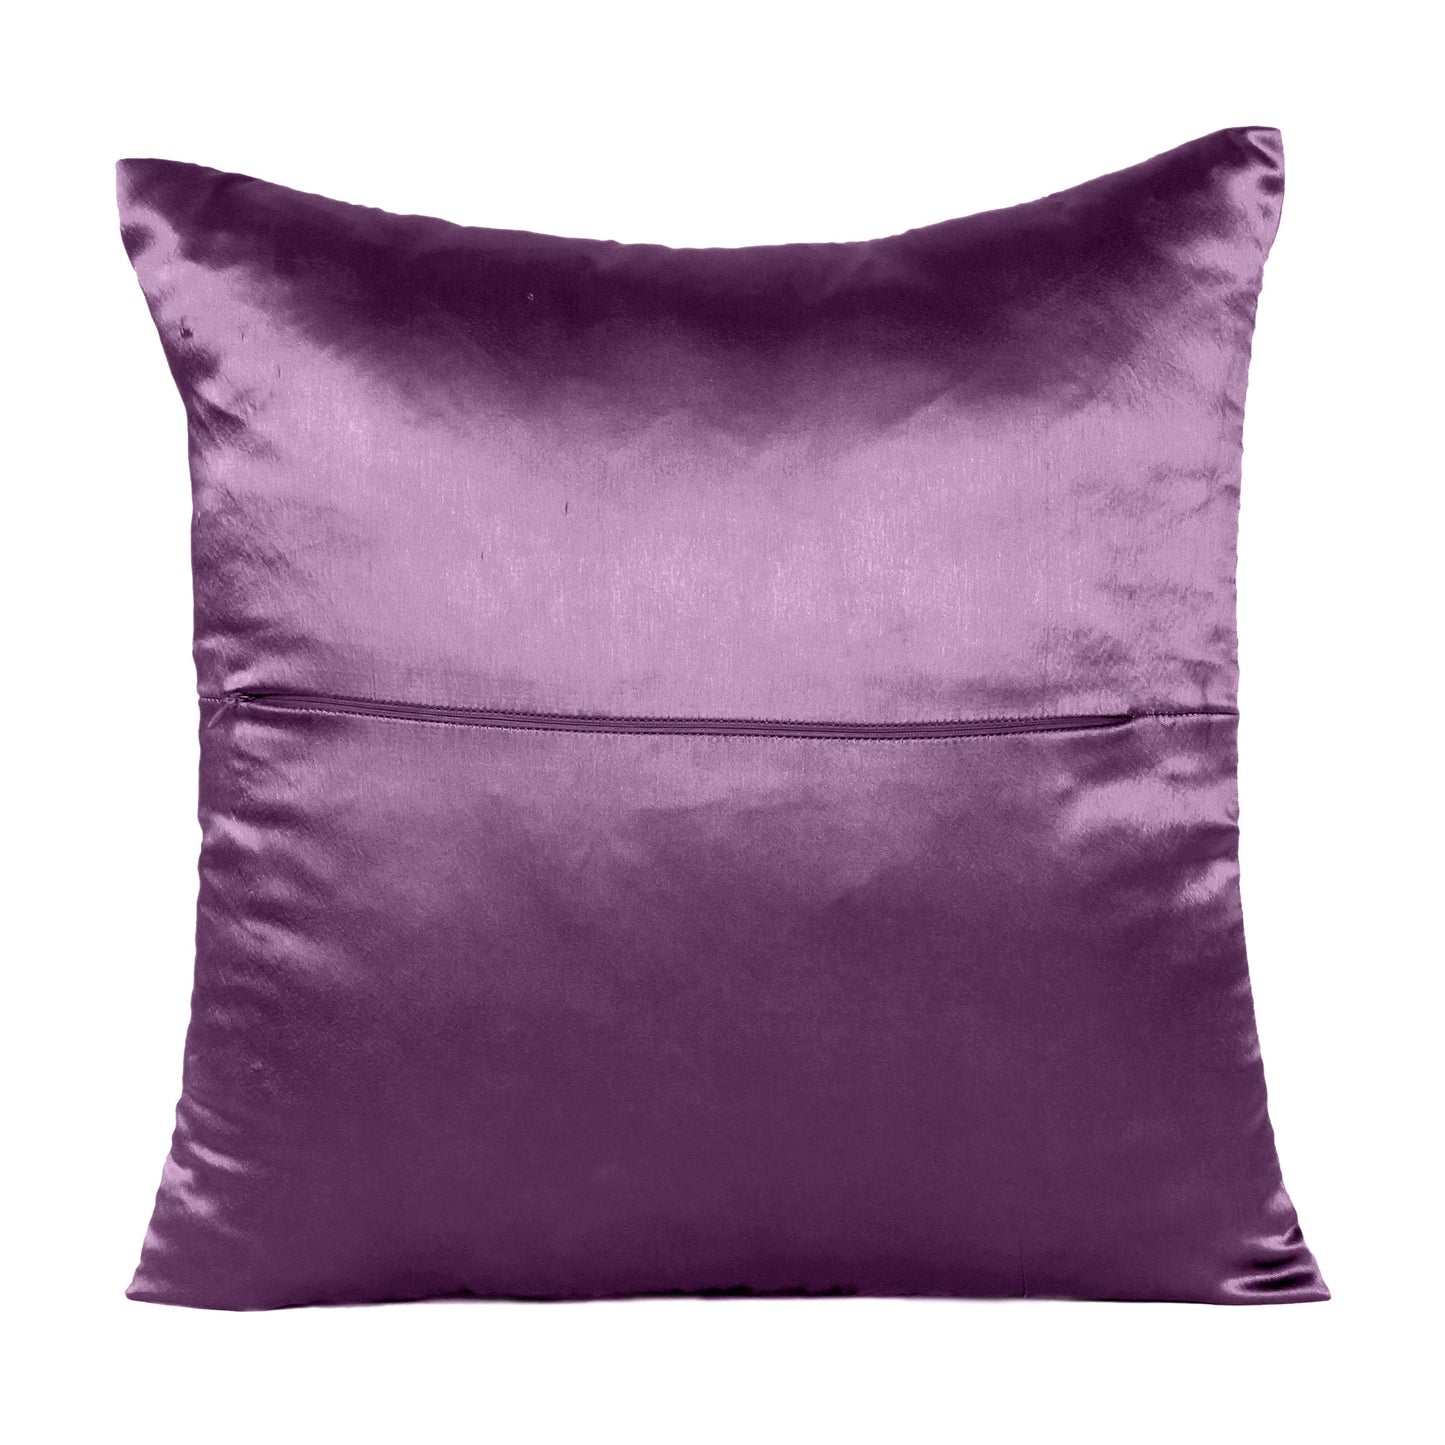 Luxury Soft Plain Satin Silk Cushion Cover in Set of 2 - Purple Passion